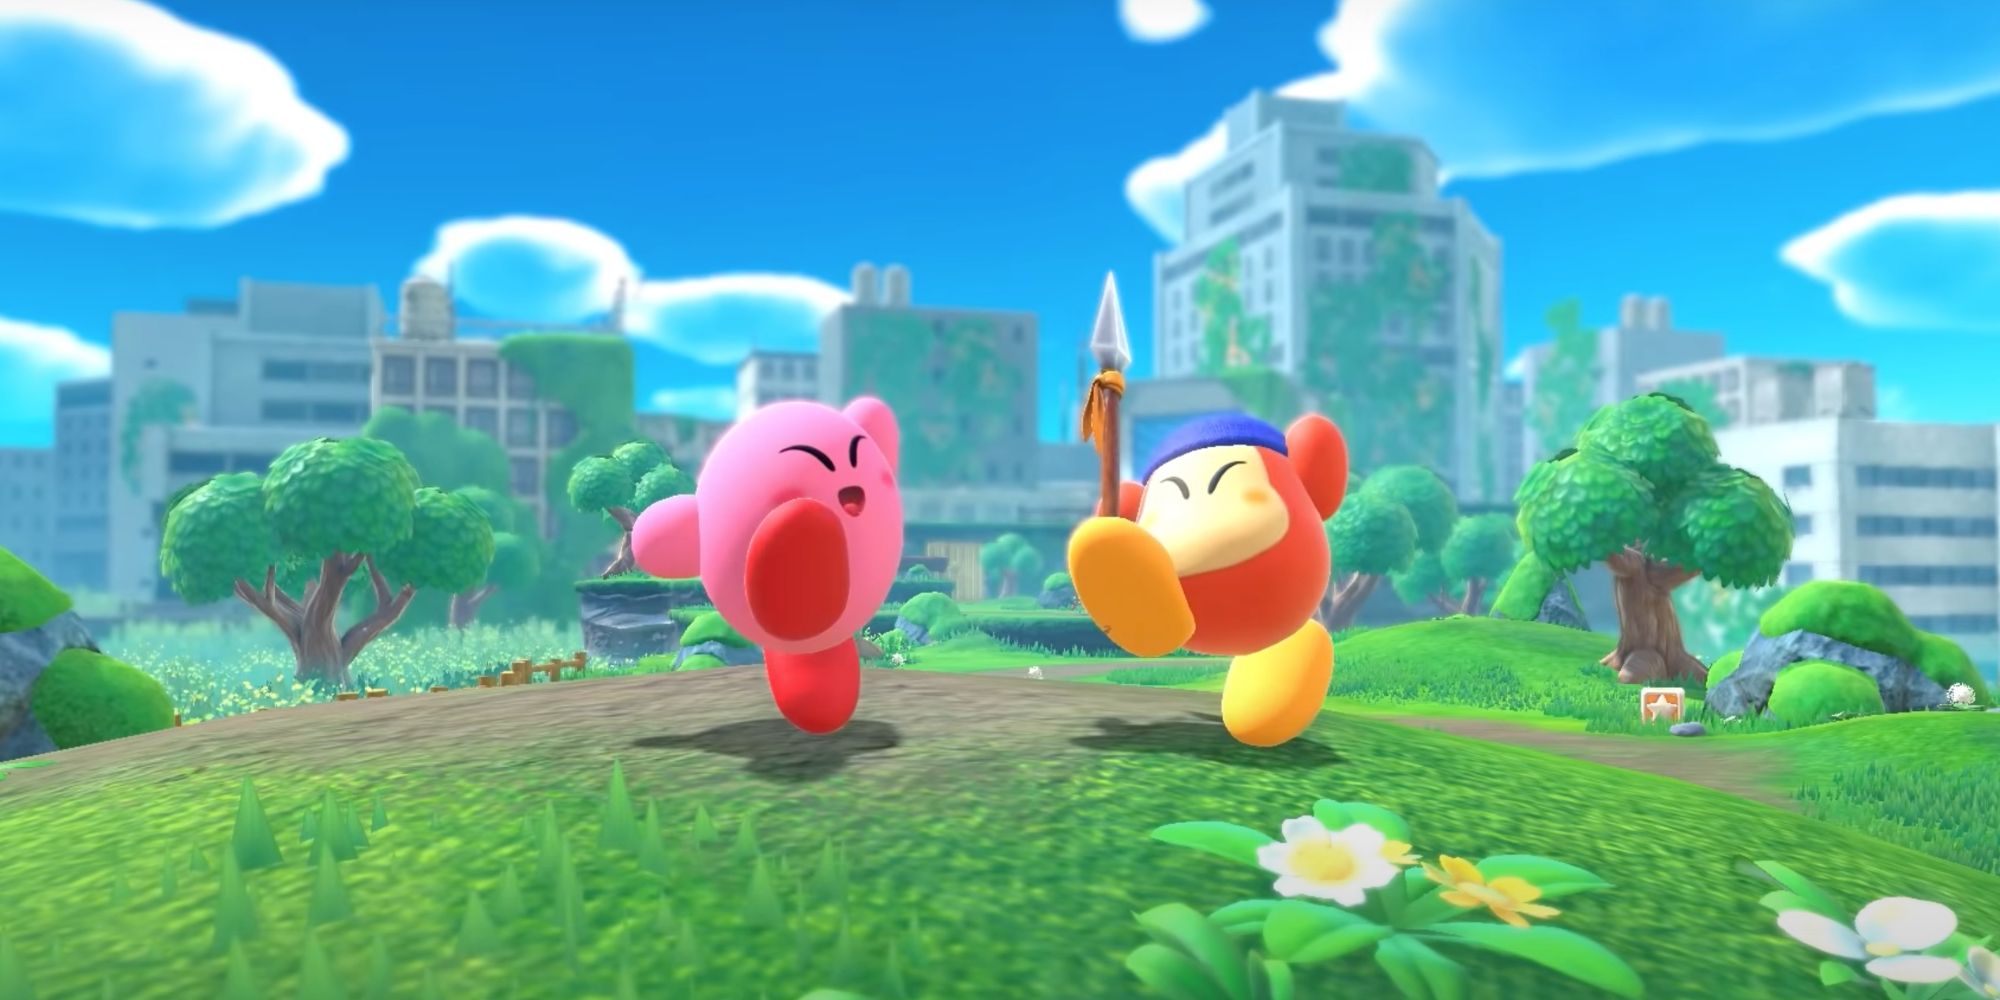 Bandana Waddle Dee has a much lesser role in Kirby and the Forgotten Land because they don't have the abilities to engage with the game's primary mechanics